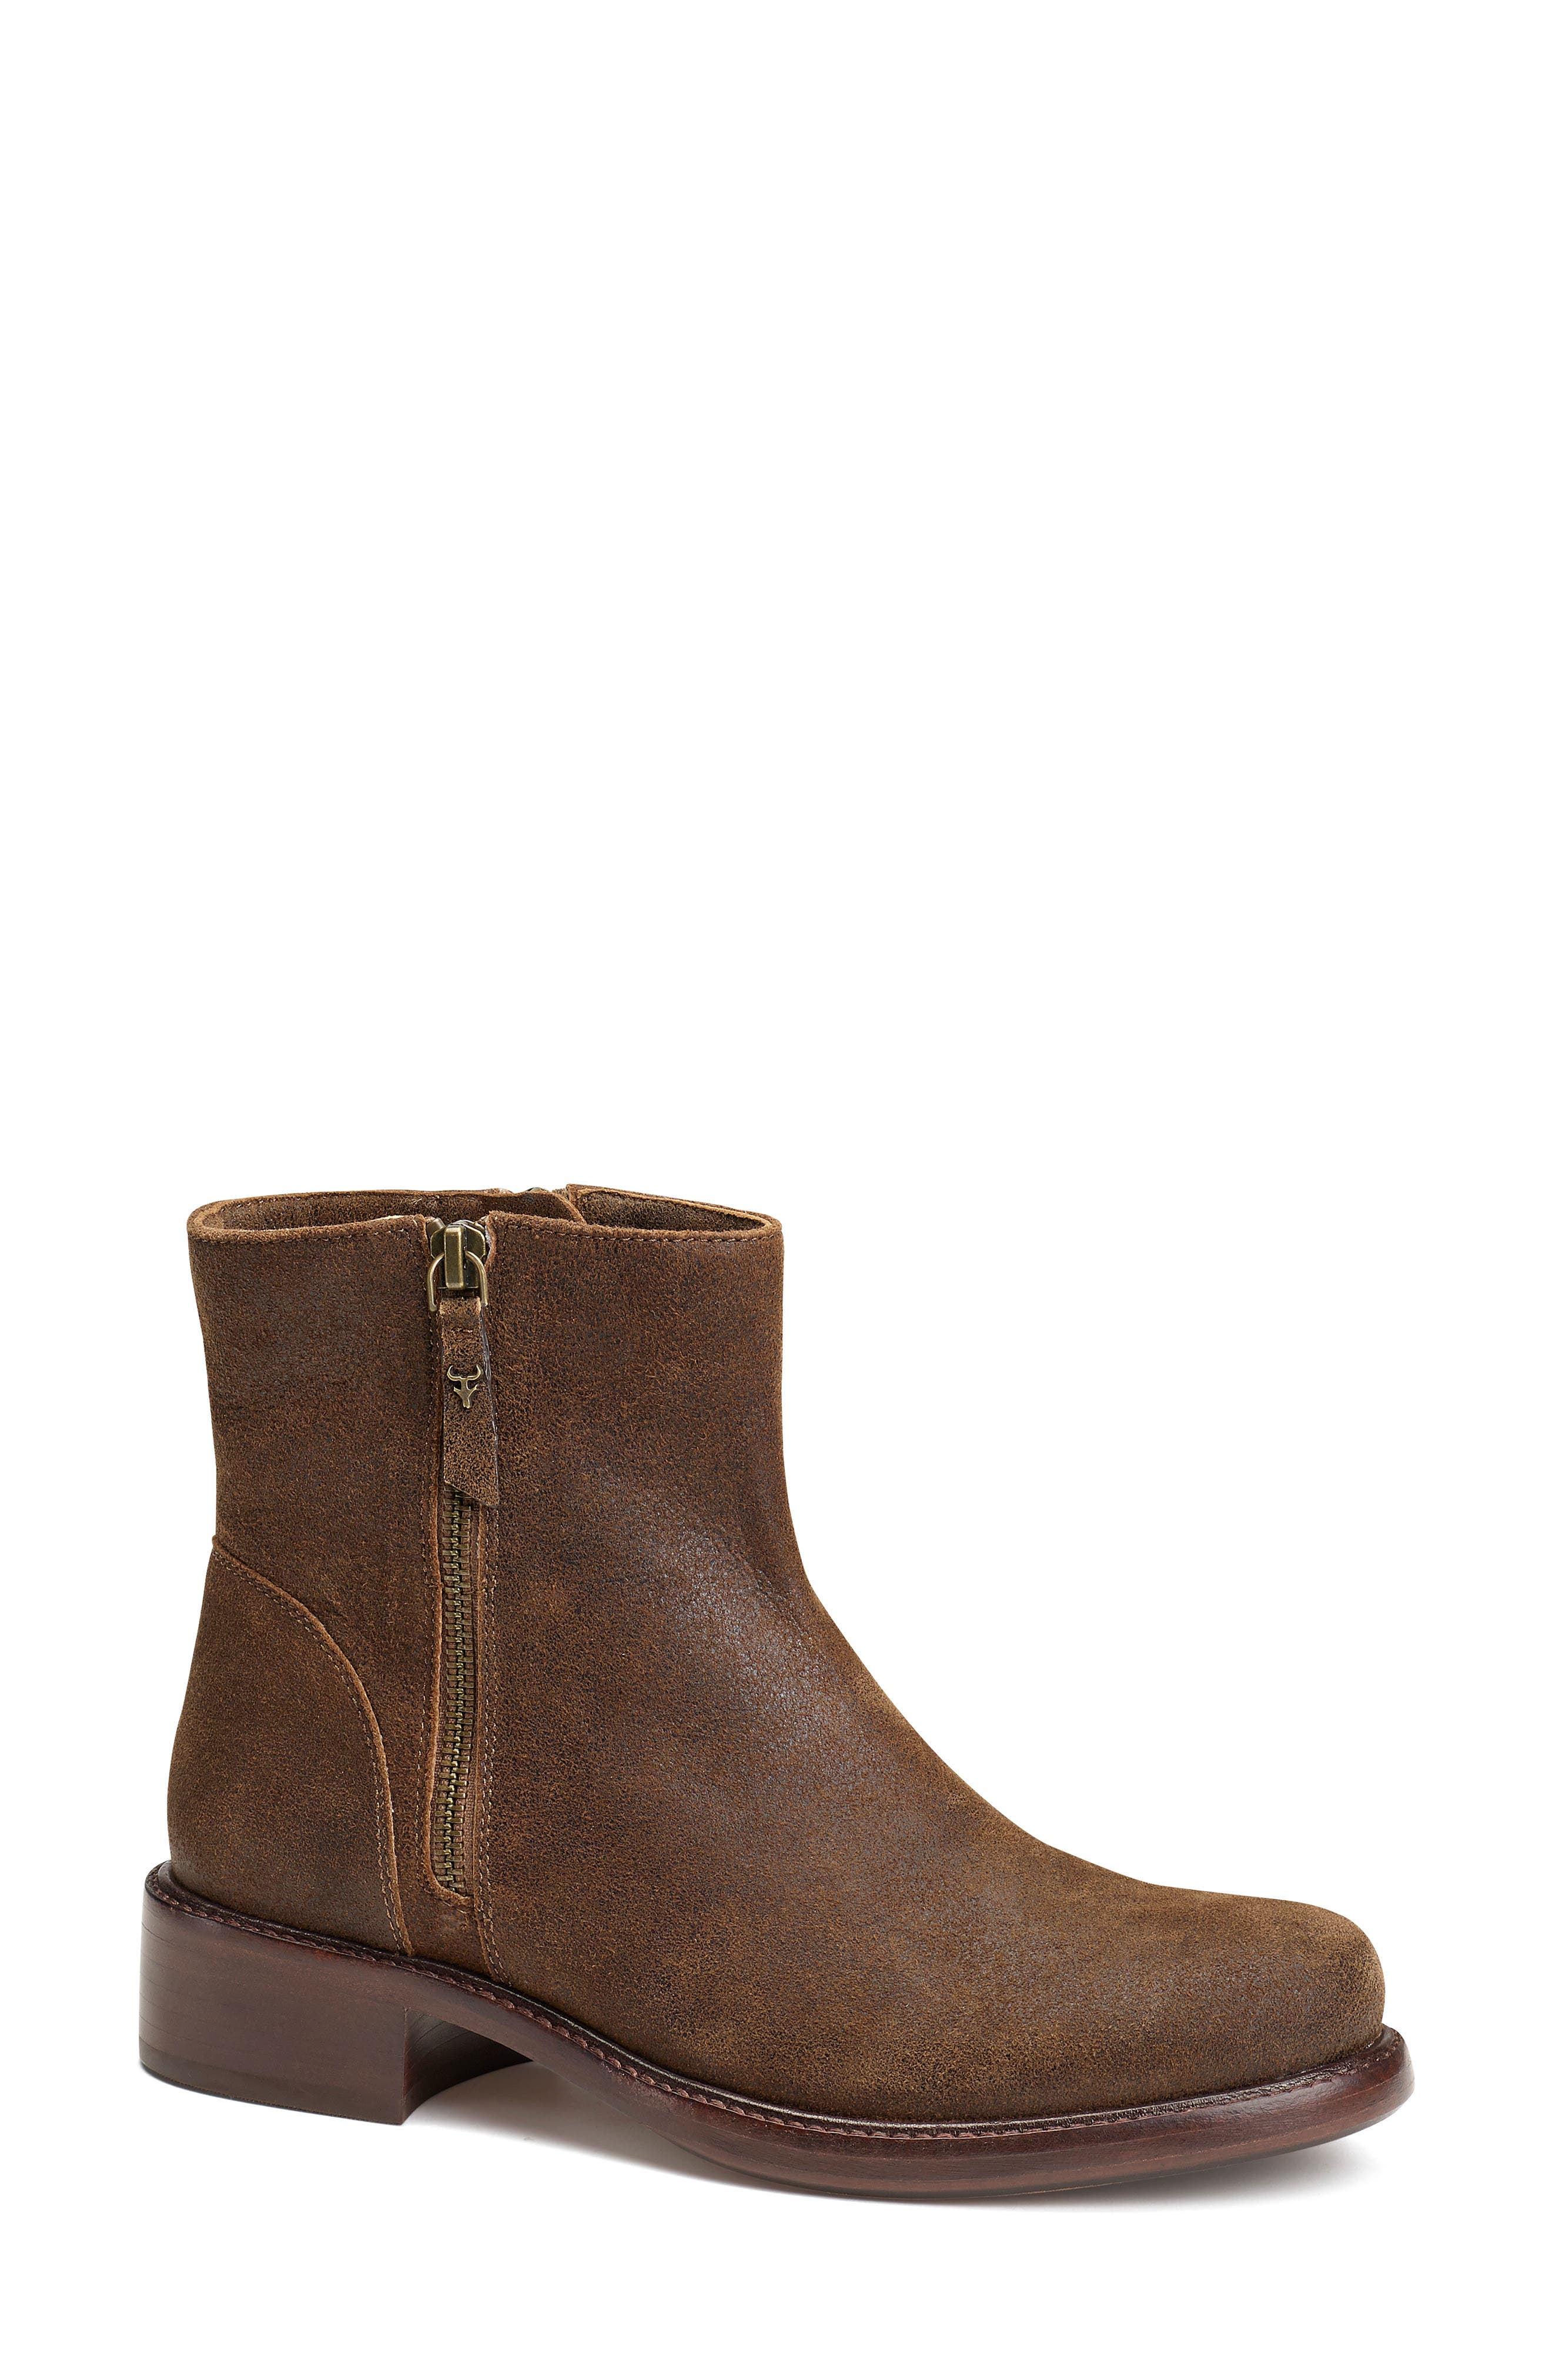 trask charlo boots